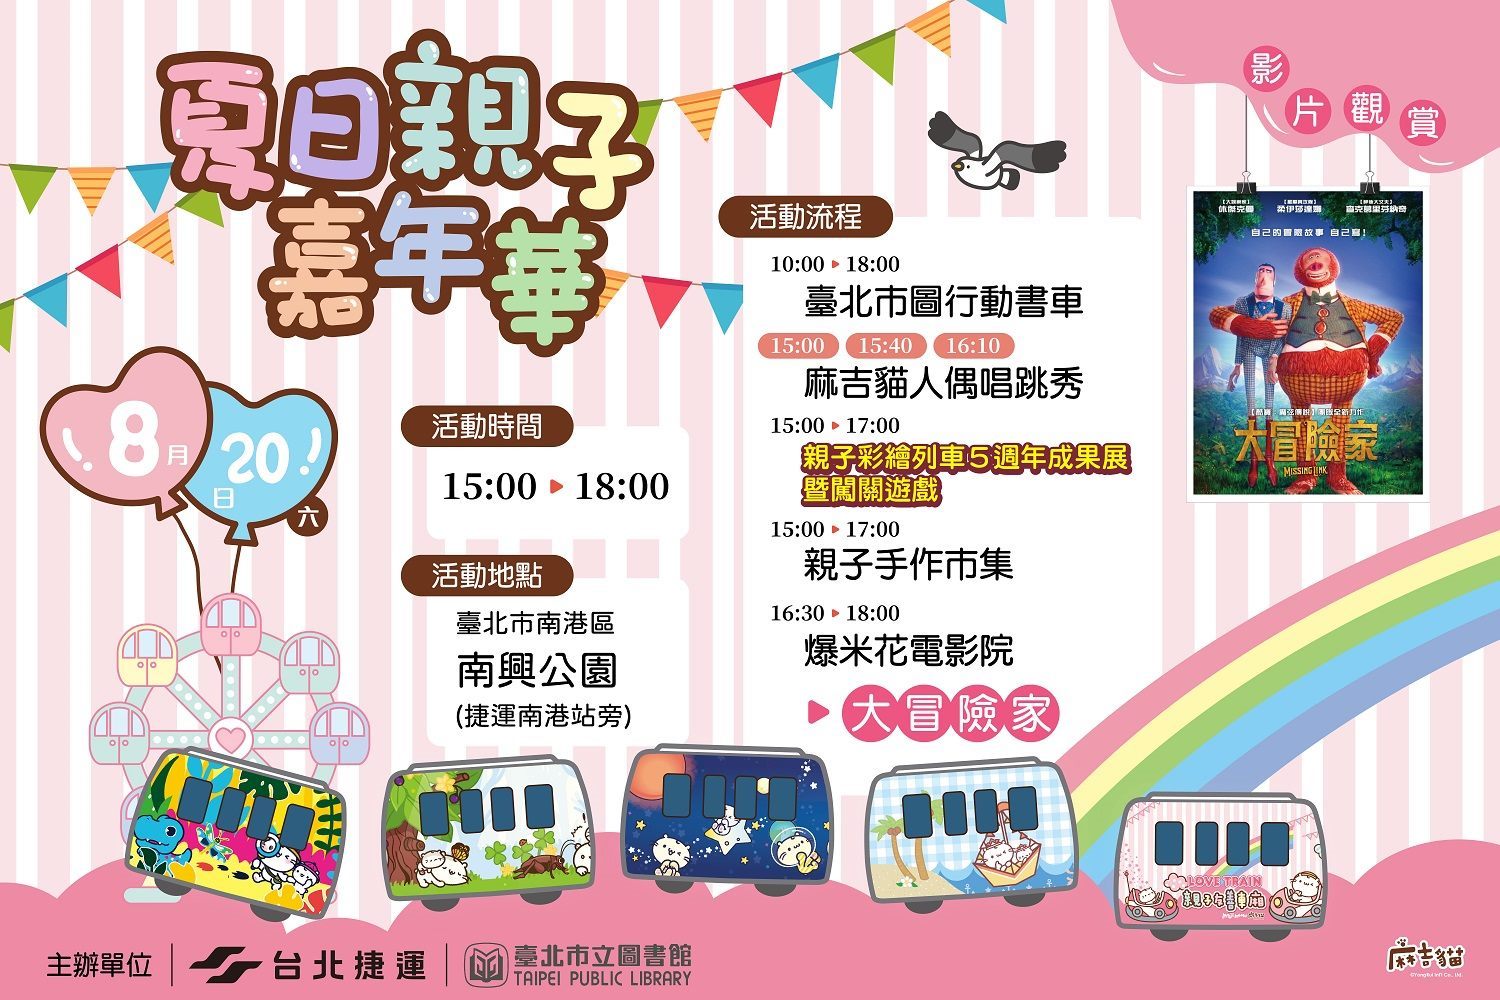 Activity poster of the Summer Days Family Carnival